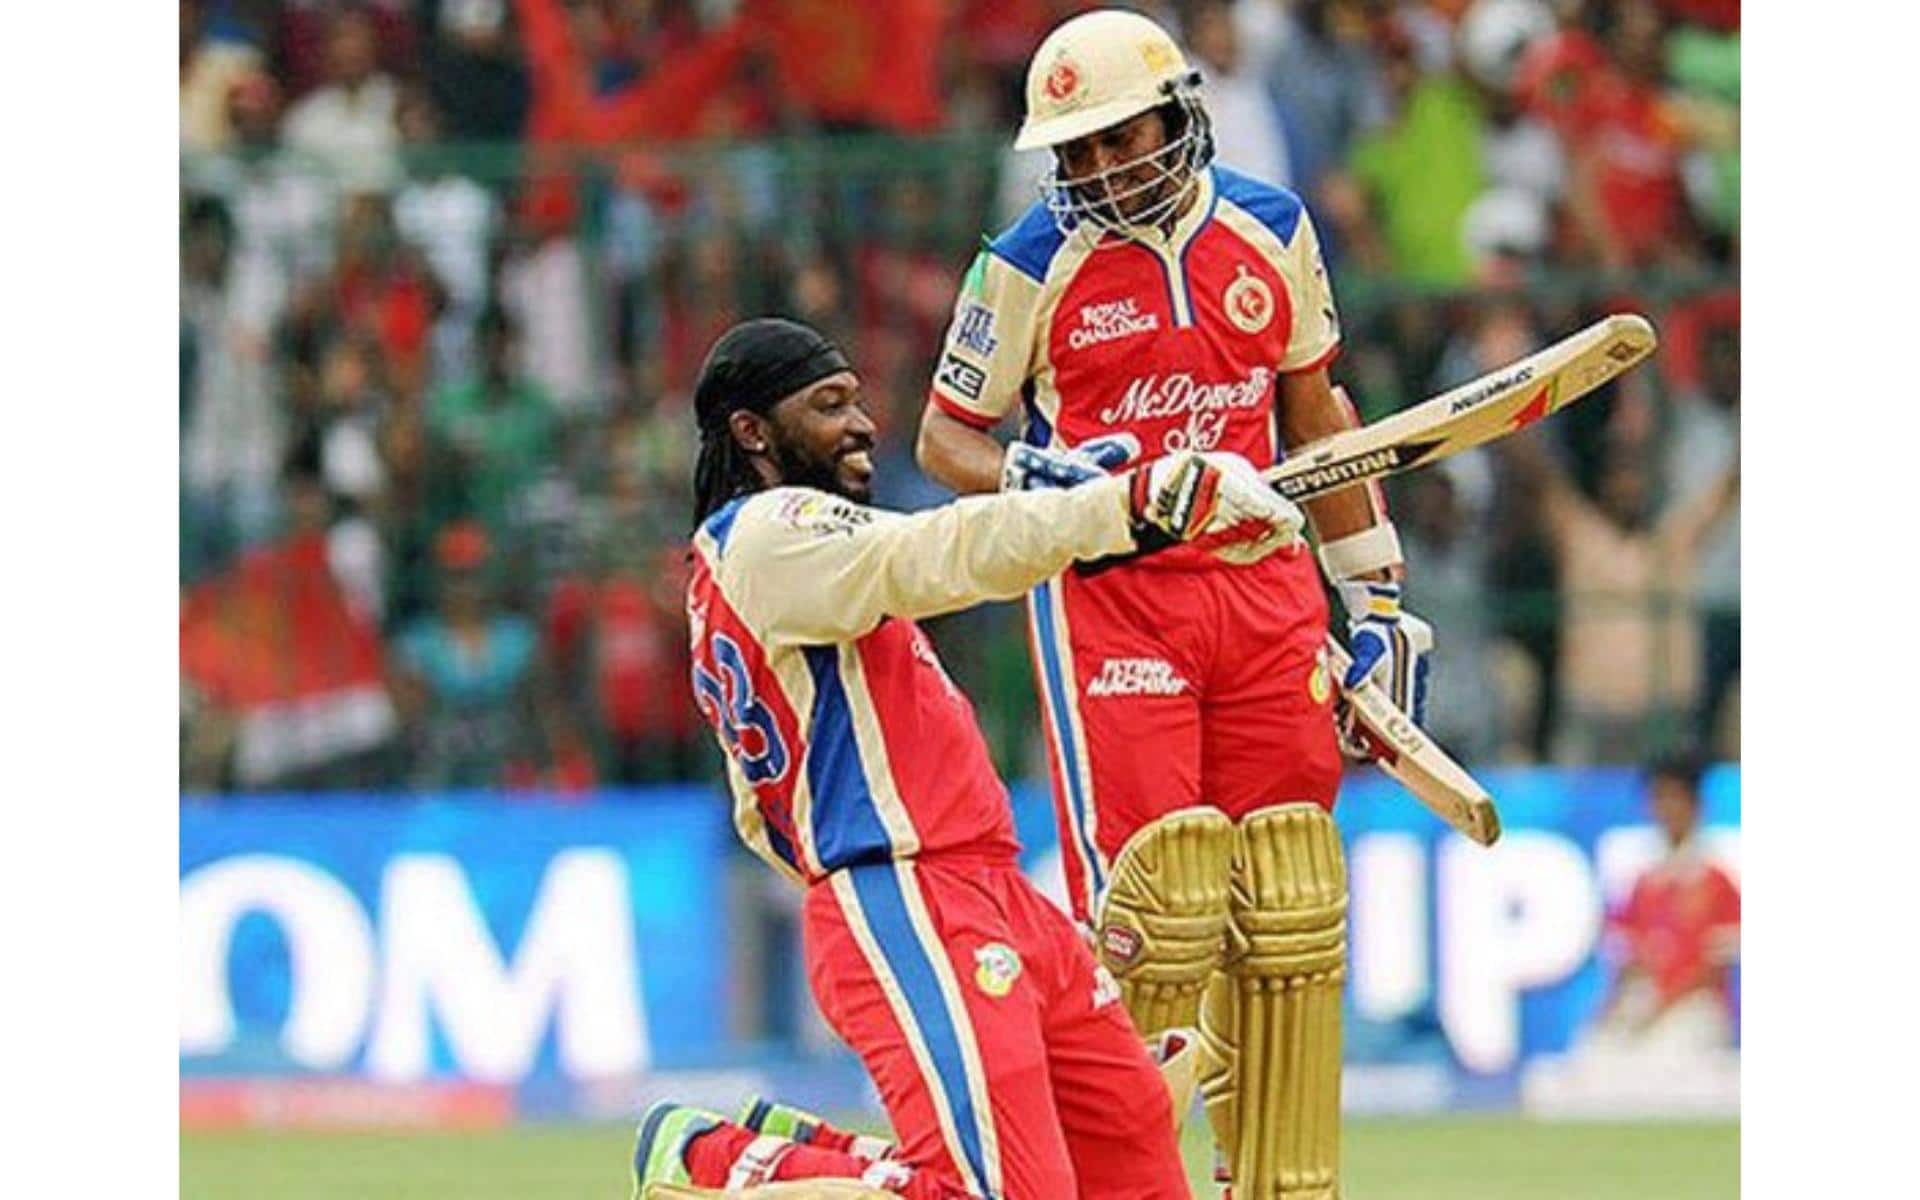 Gayle has struck the most sixes in an IPL innings [X]
